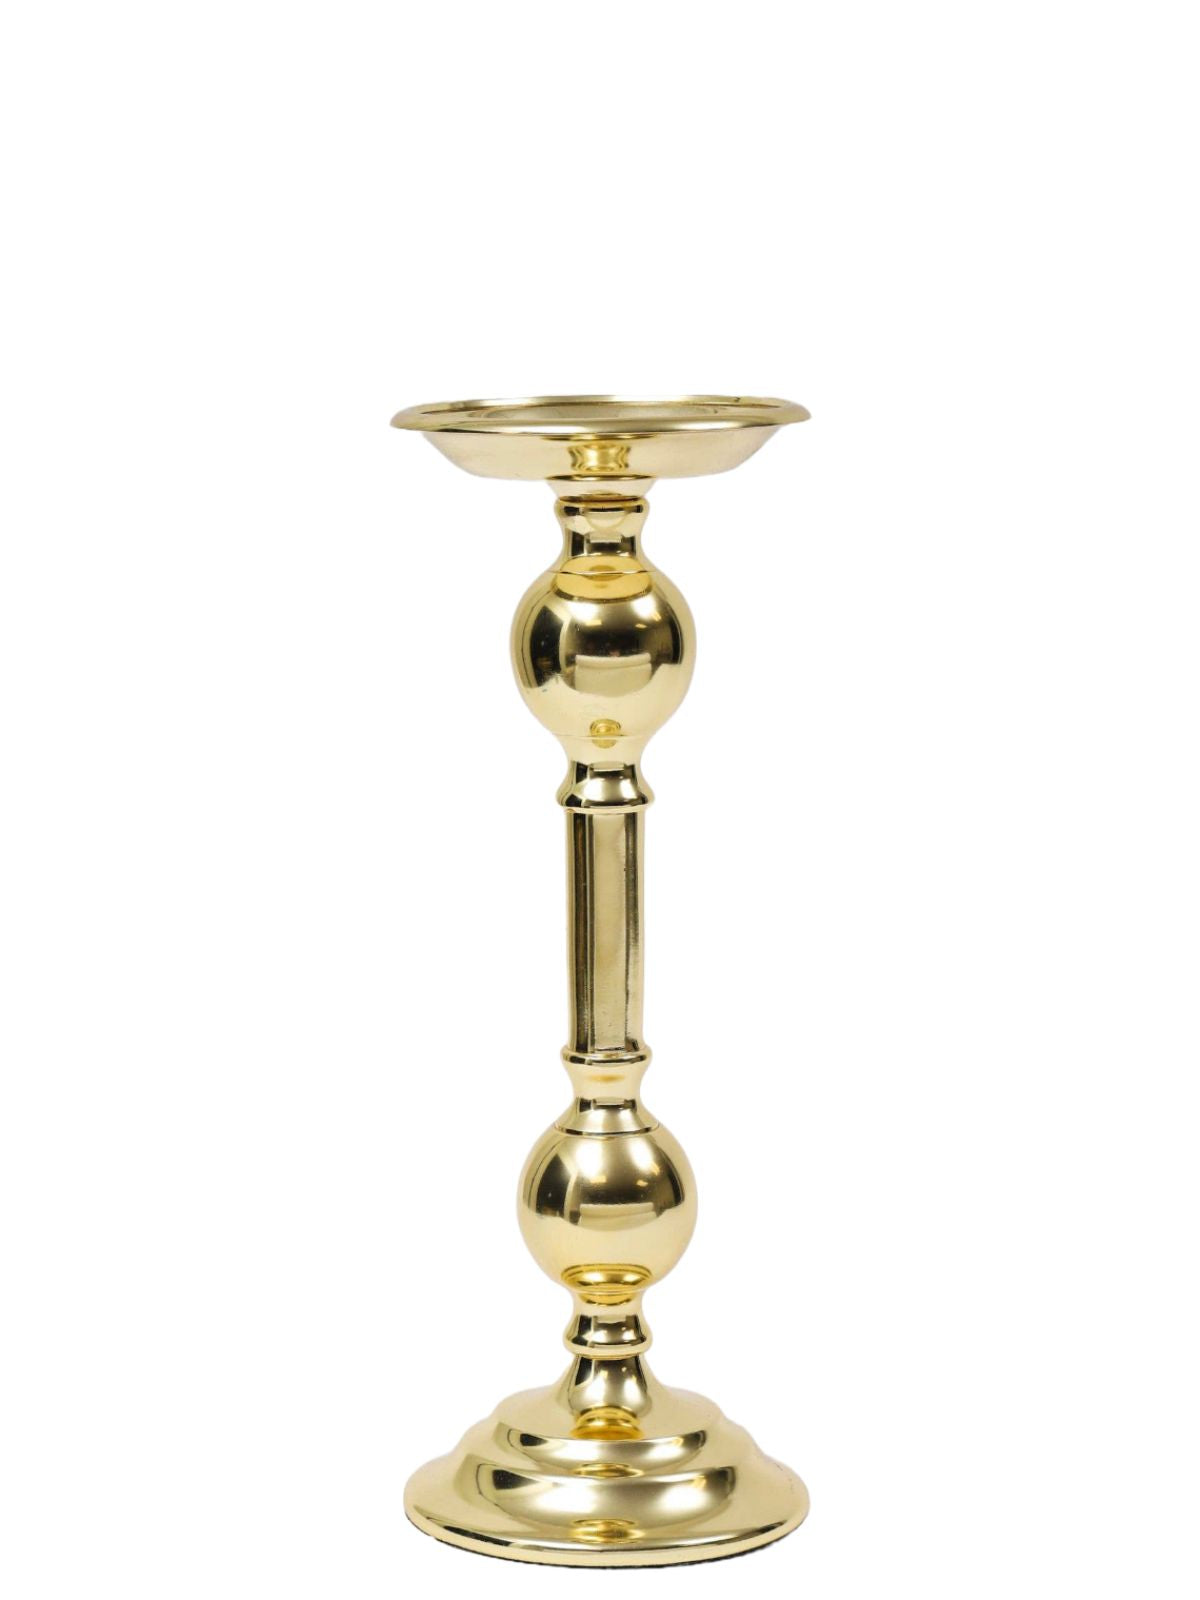 14H Gold Brass Candleholder with Bead Detailed Between the Stem. Sold by KYA Home Decor. 